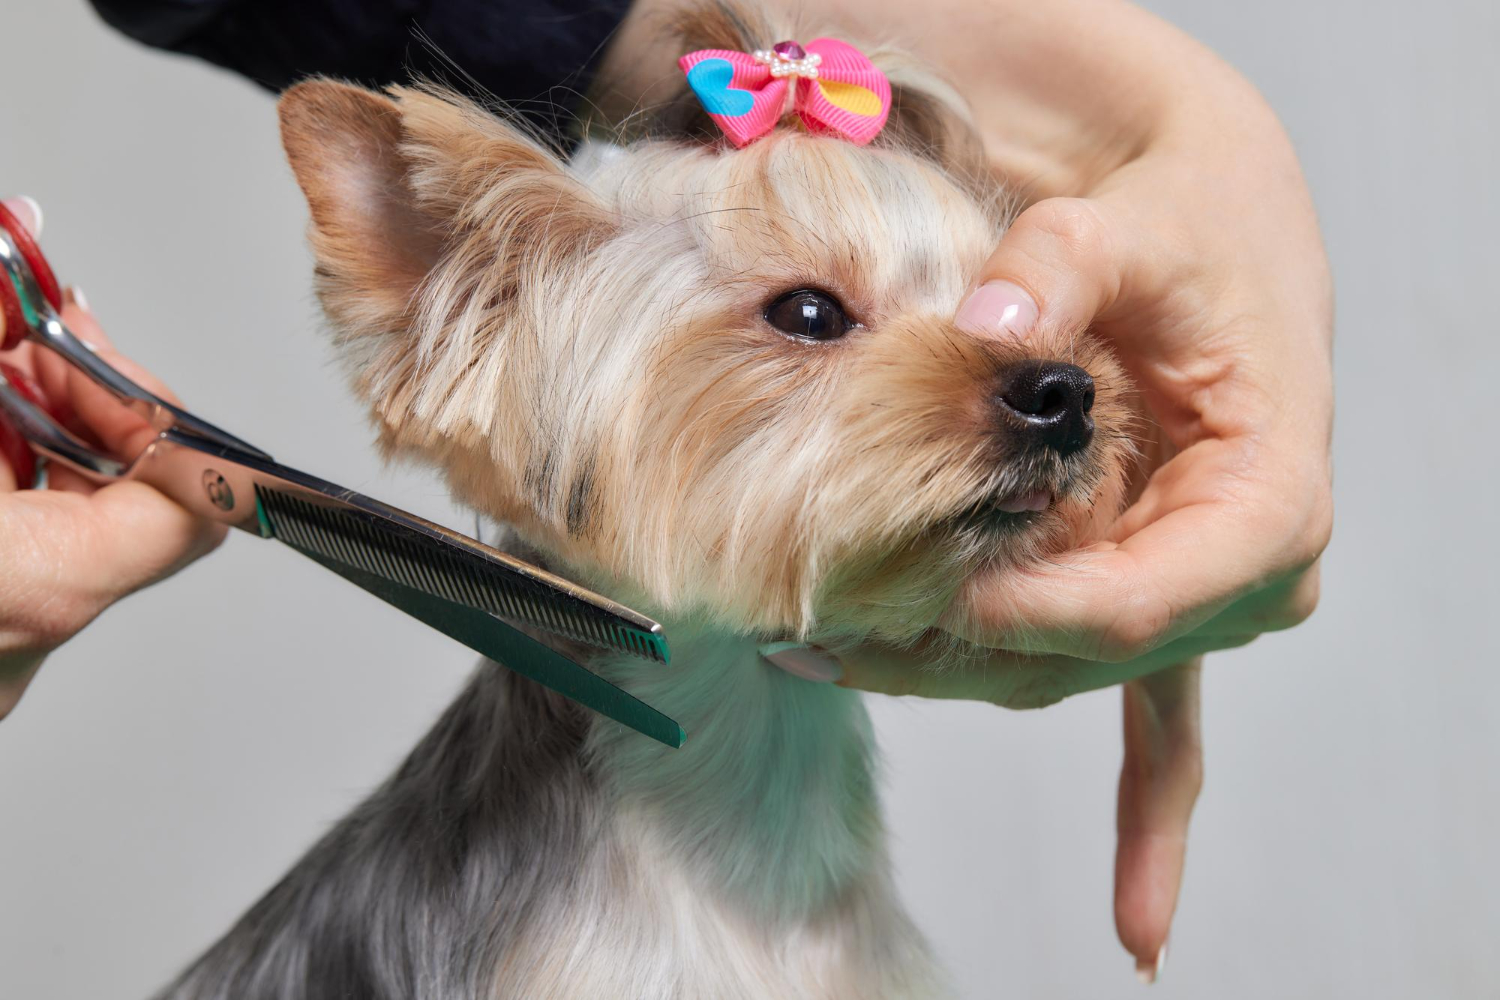 Turn your pet into a star with our grooming and grooming services